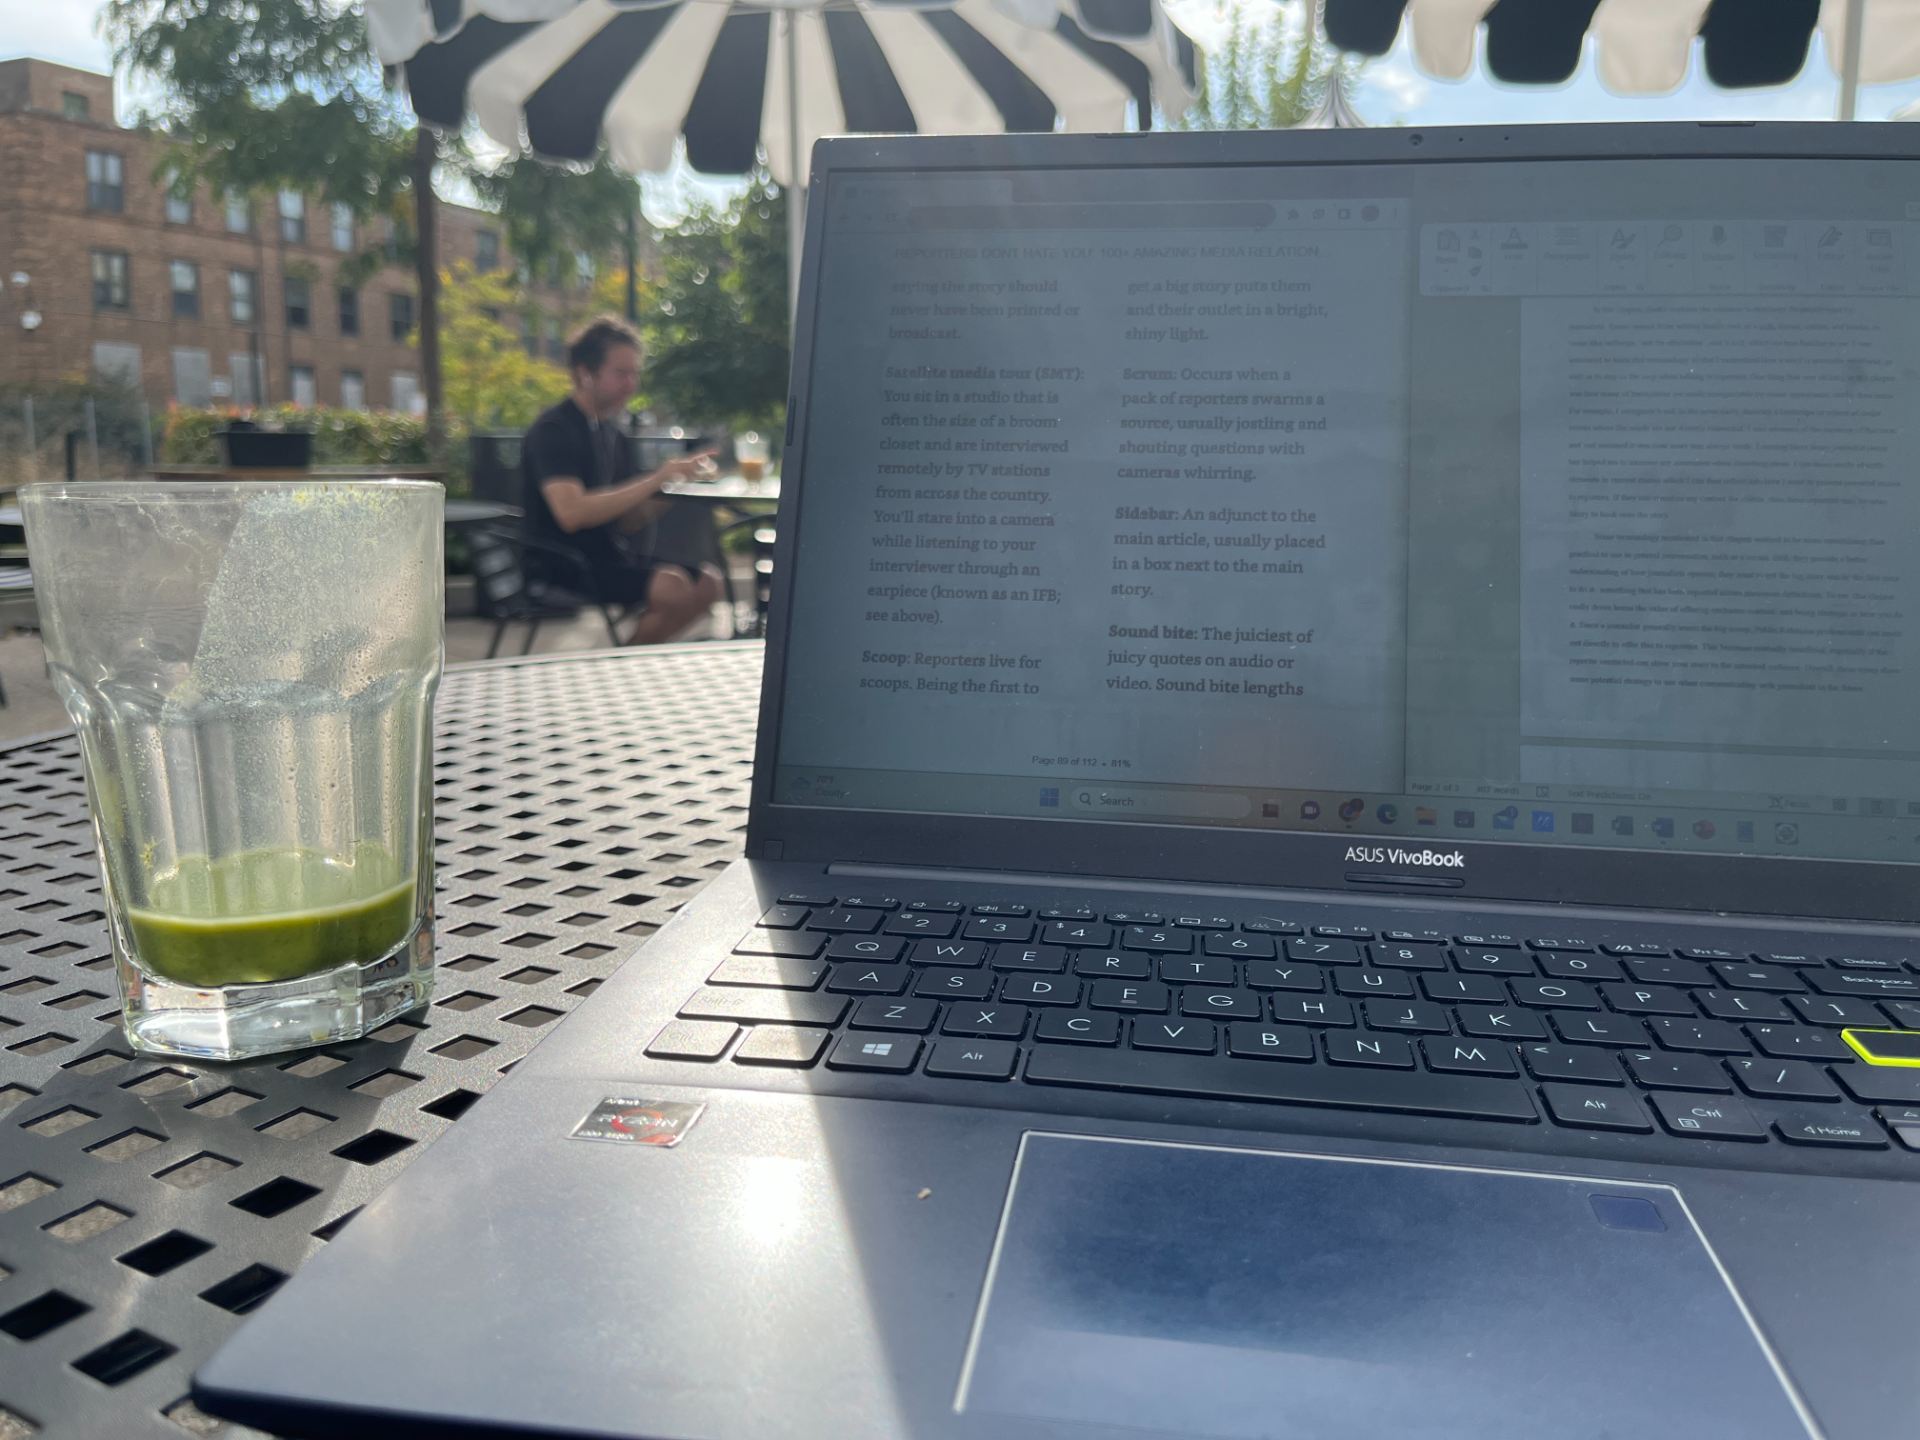 Laptop and empty glass of matcha showing student working on applications in an outdoor patio space